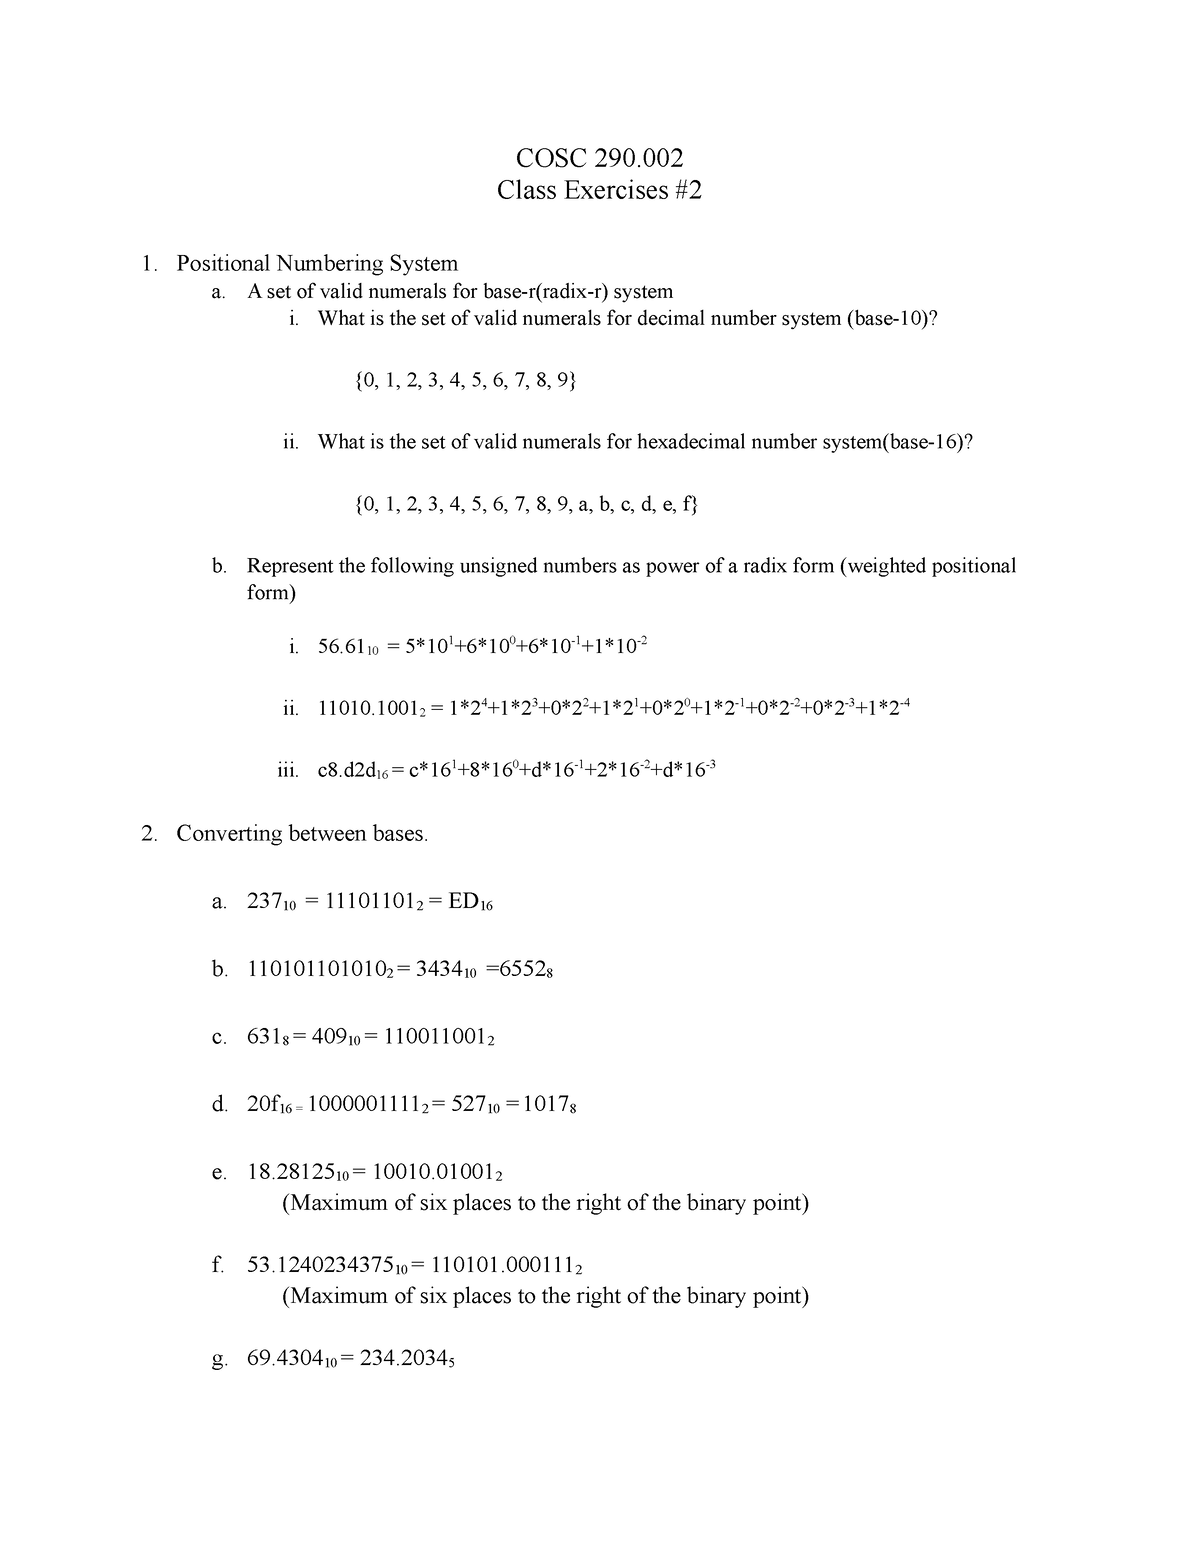 Class exercise 2 - COSC 290. Class Exercises 1. Positional Numbering ...